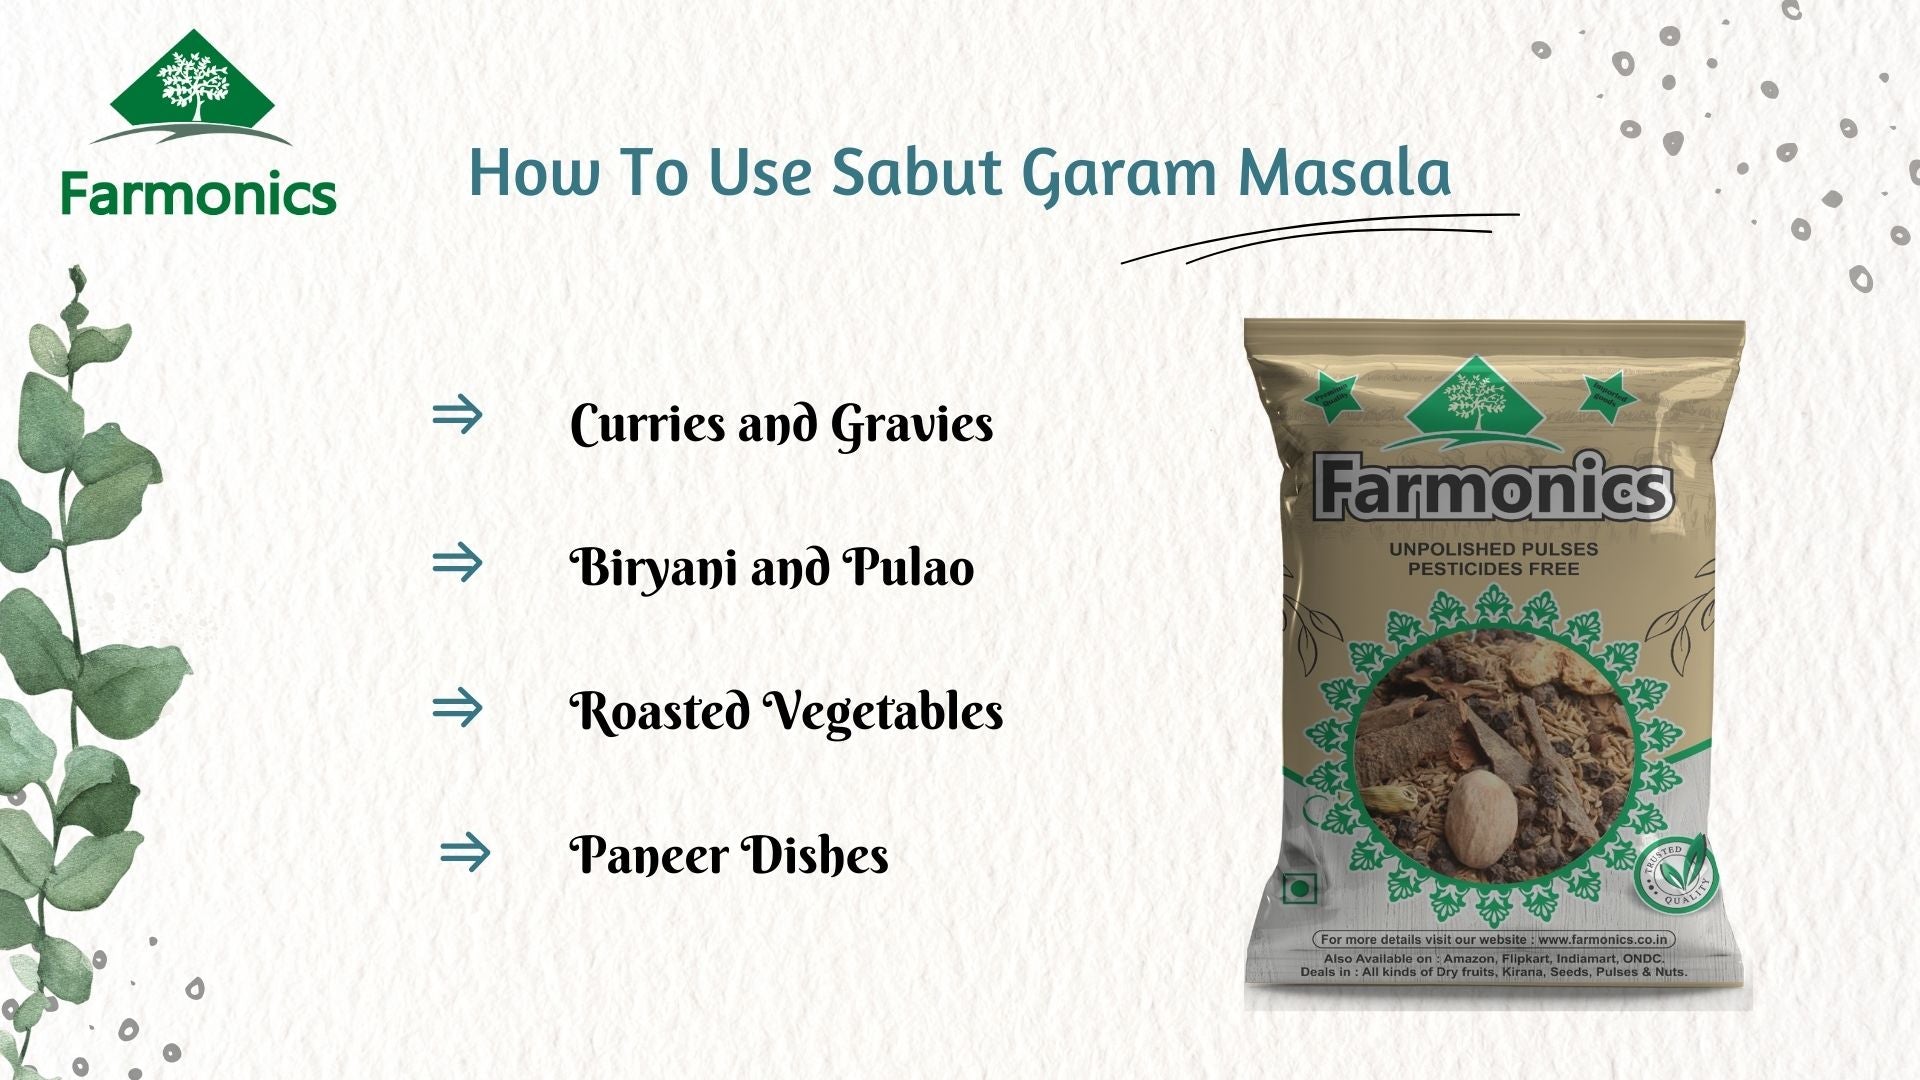 Ways in which you can preserve the best quality Framonics sabut garam masala 